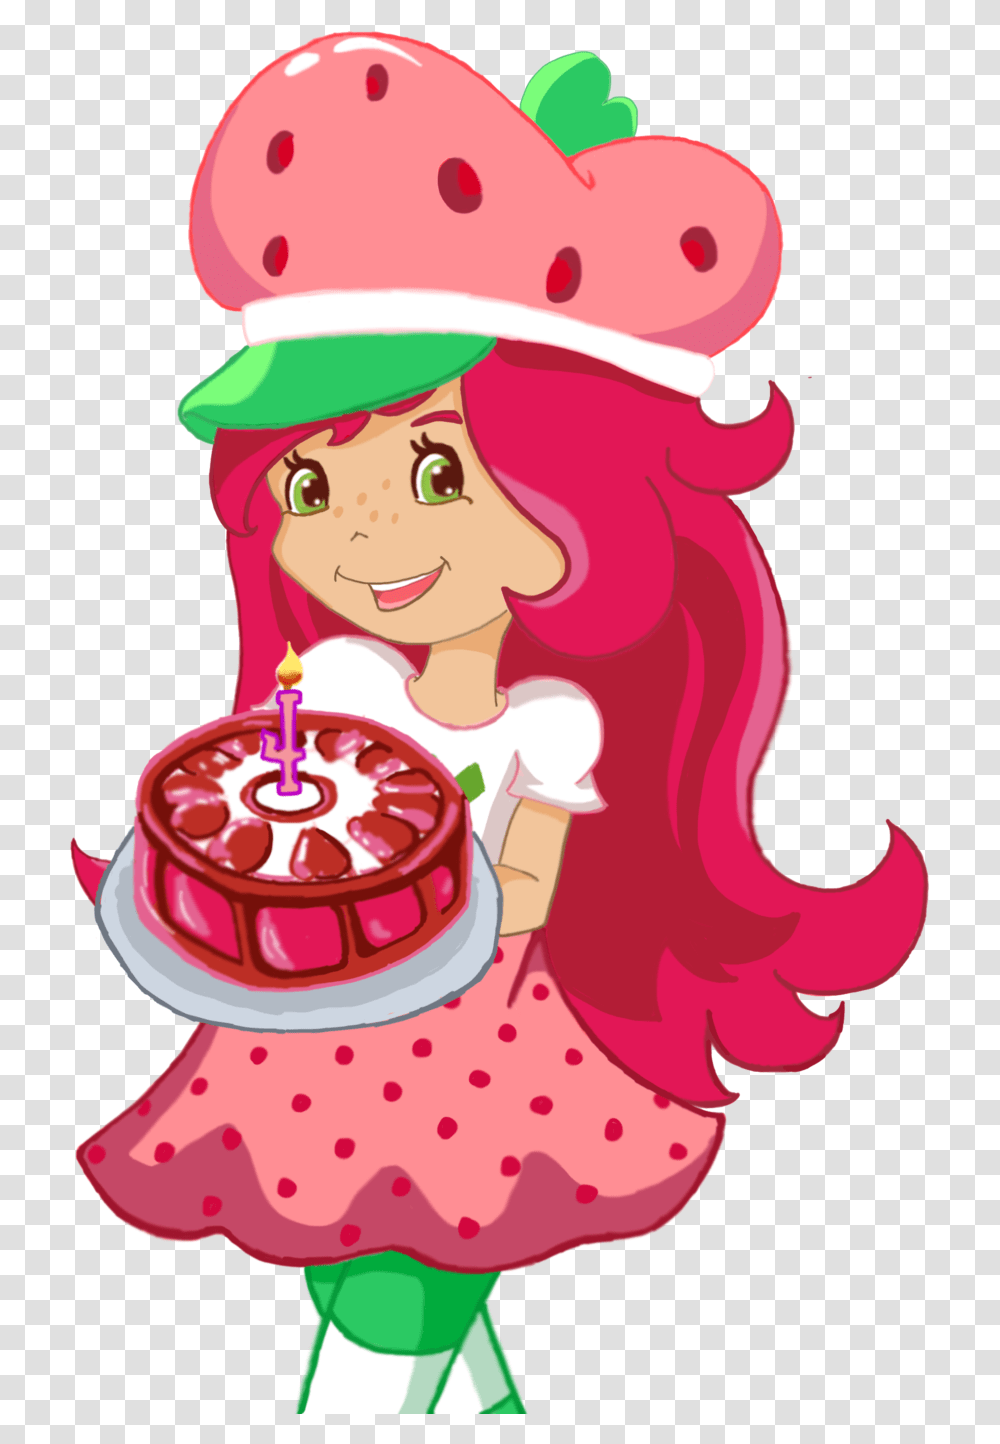 Strawberry Shortcake Logo Strawberry Shortcake Cartoon, Performer, Leisure Activities, Sweets, Food Transparent Png